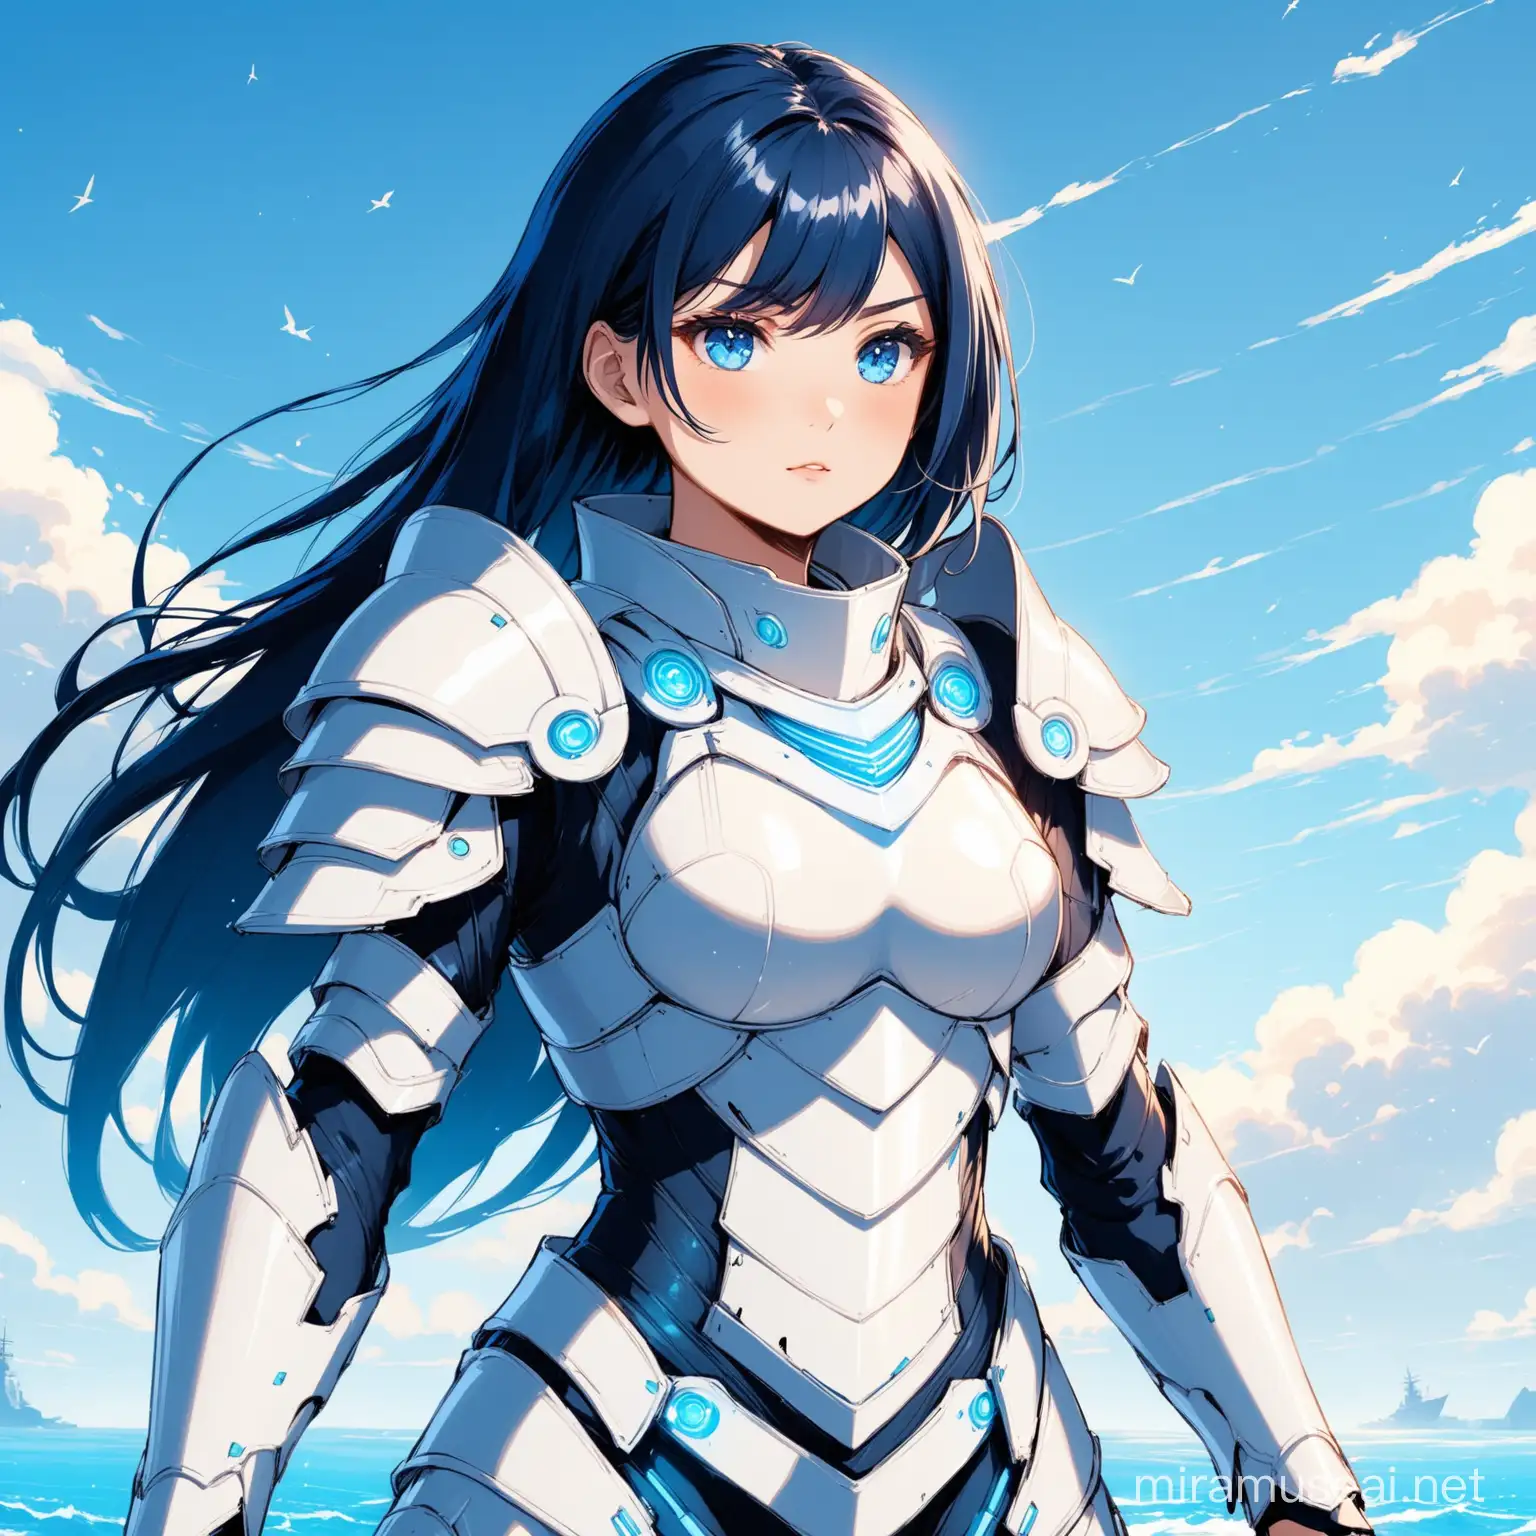 Futuristic Girl Warrior in Navy Hair and White Armor